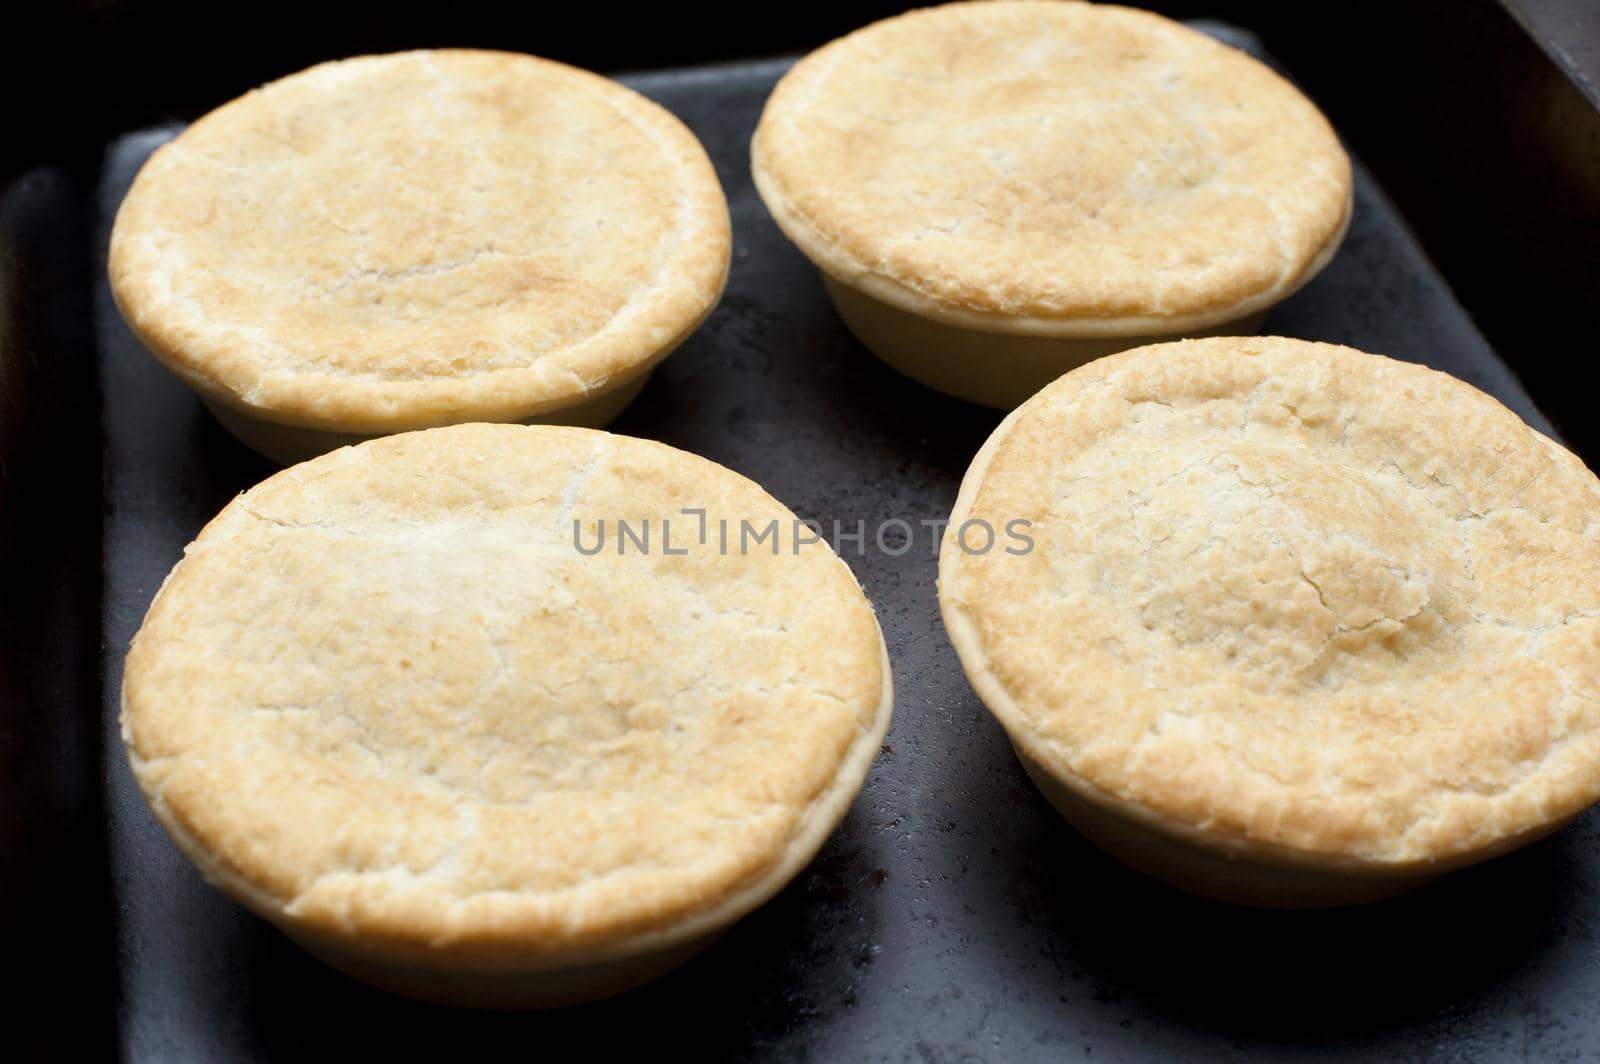 Four freshly baked meat pies topped with a golden crust in a bakery or takeaway restaurant for a quick delicious snack